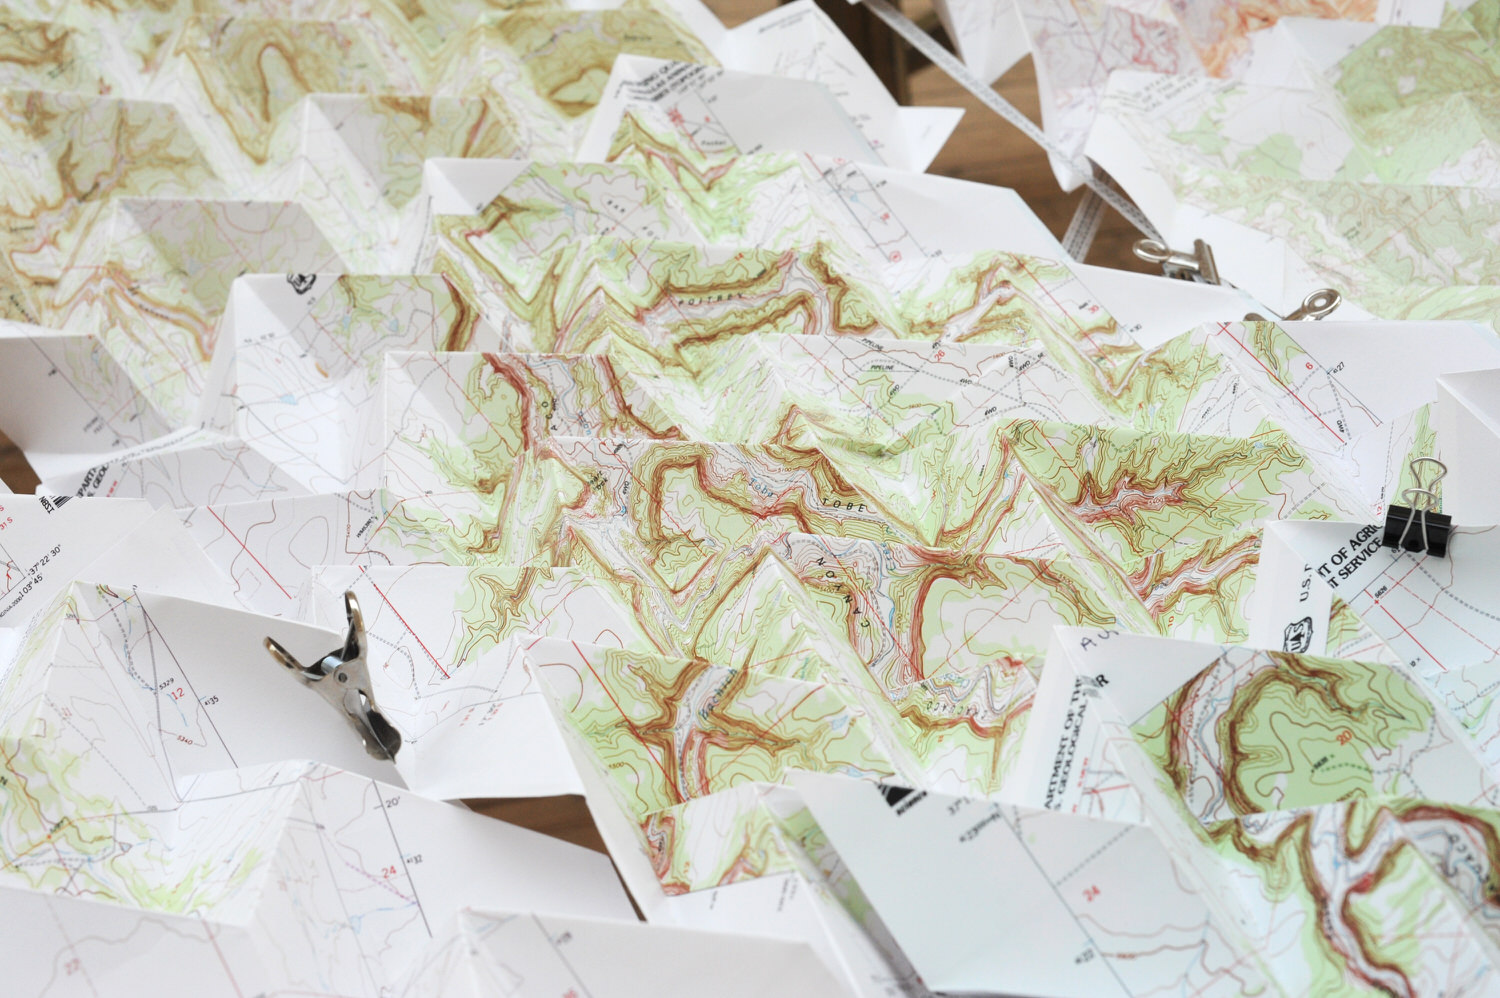 Picketwire Canyon Model #2 (Morgan, Raoul, Ben, Anna and Stefan’s 4-fold pattern), 2013